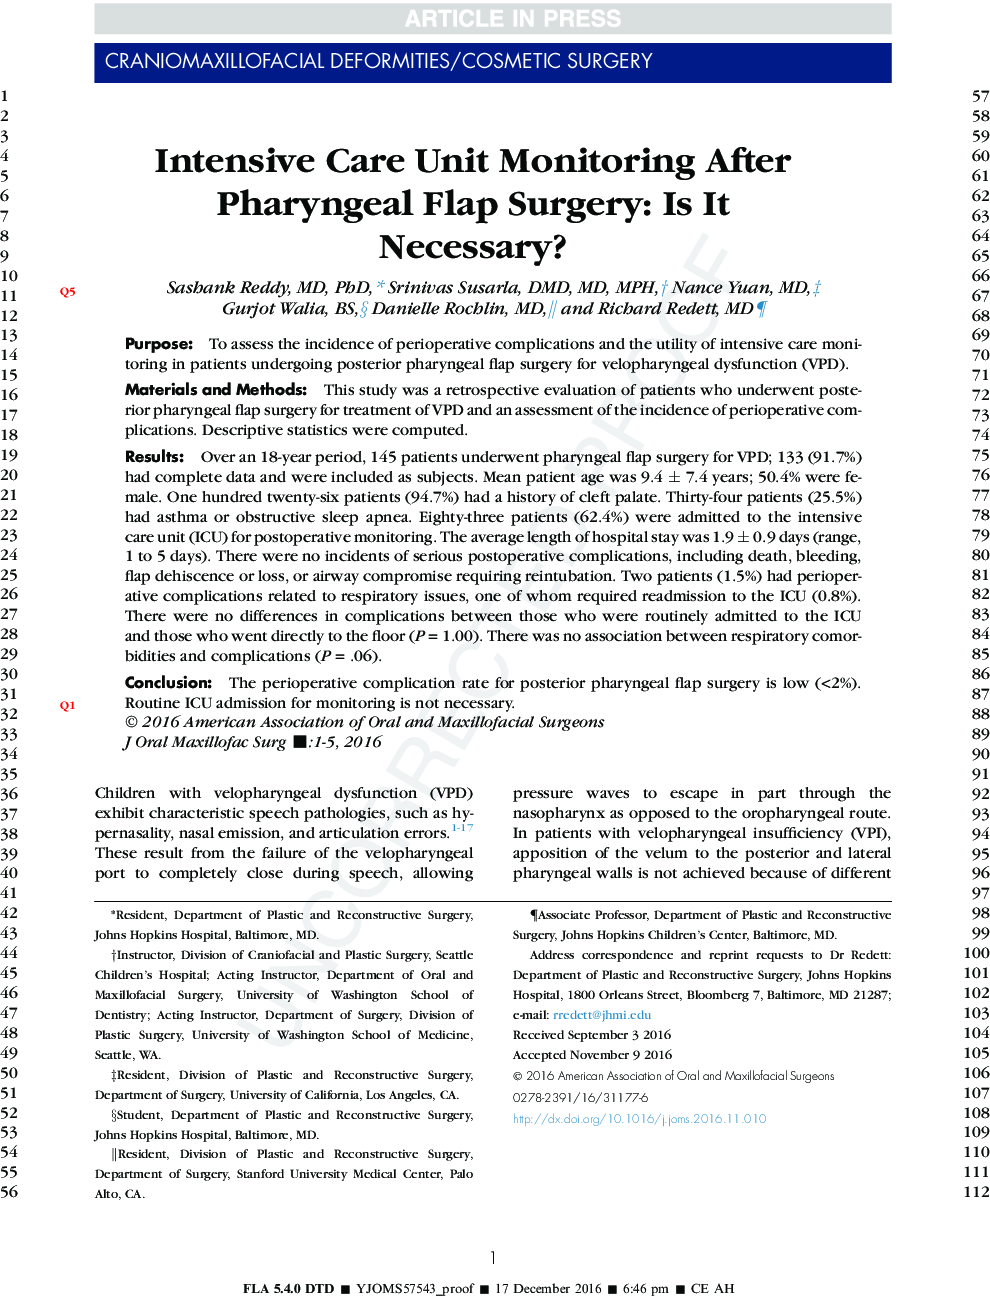 Intensive Care Unit Monitoring After Pharyngeal Flap Surgery: Is It Necessary?